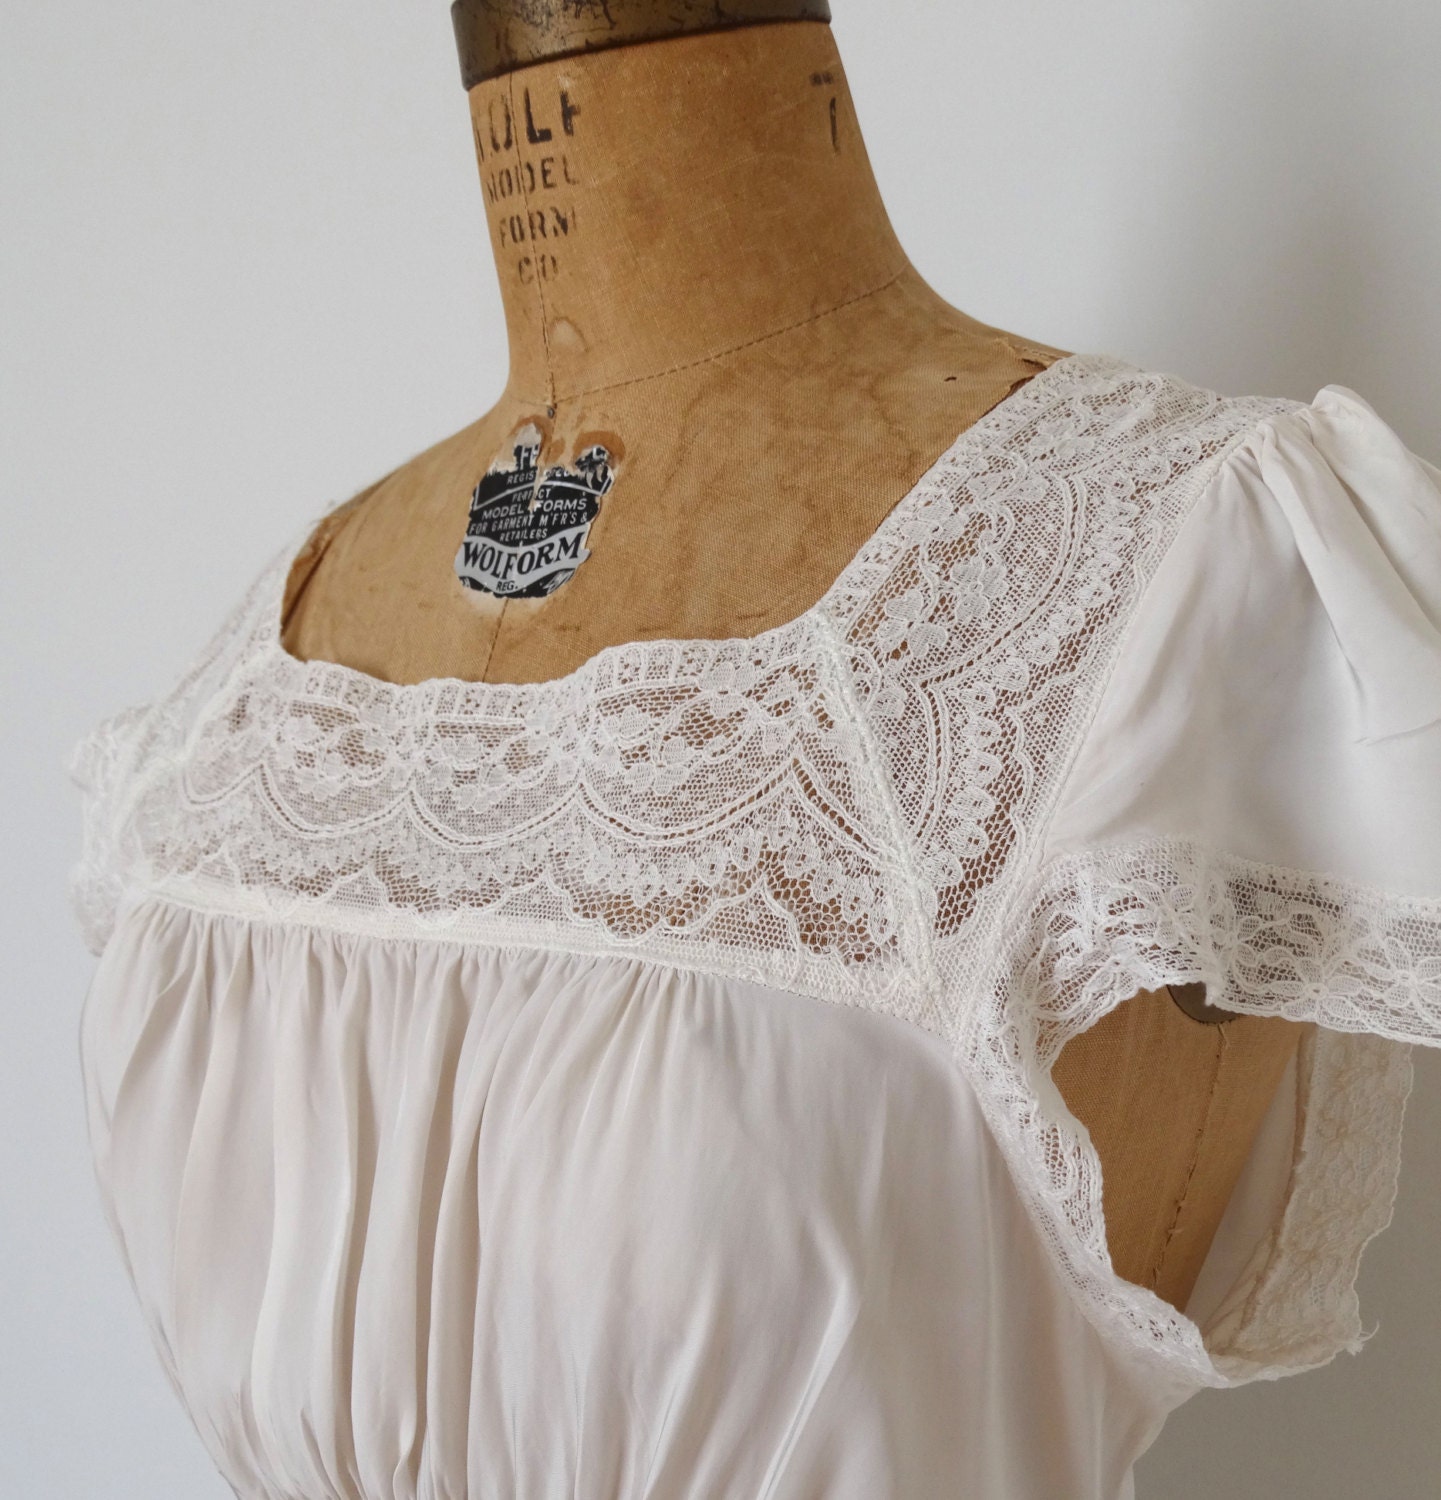 Vintage 1940s Nightgown 40s Lace Lingerie The Martha